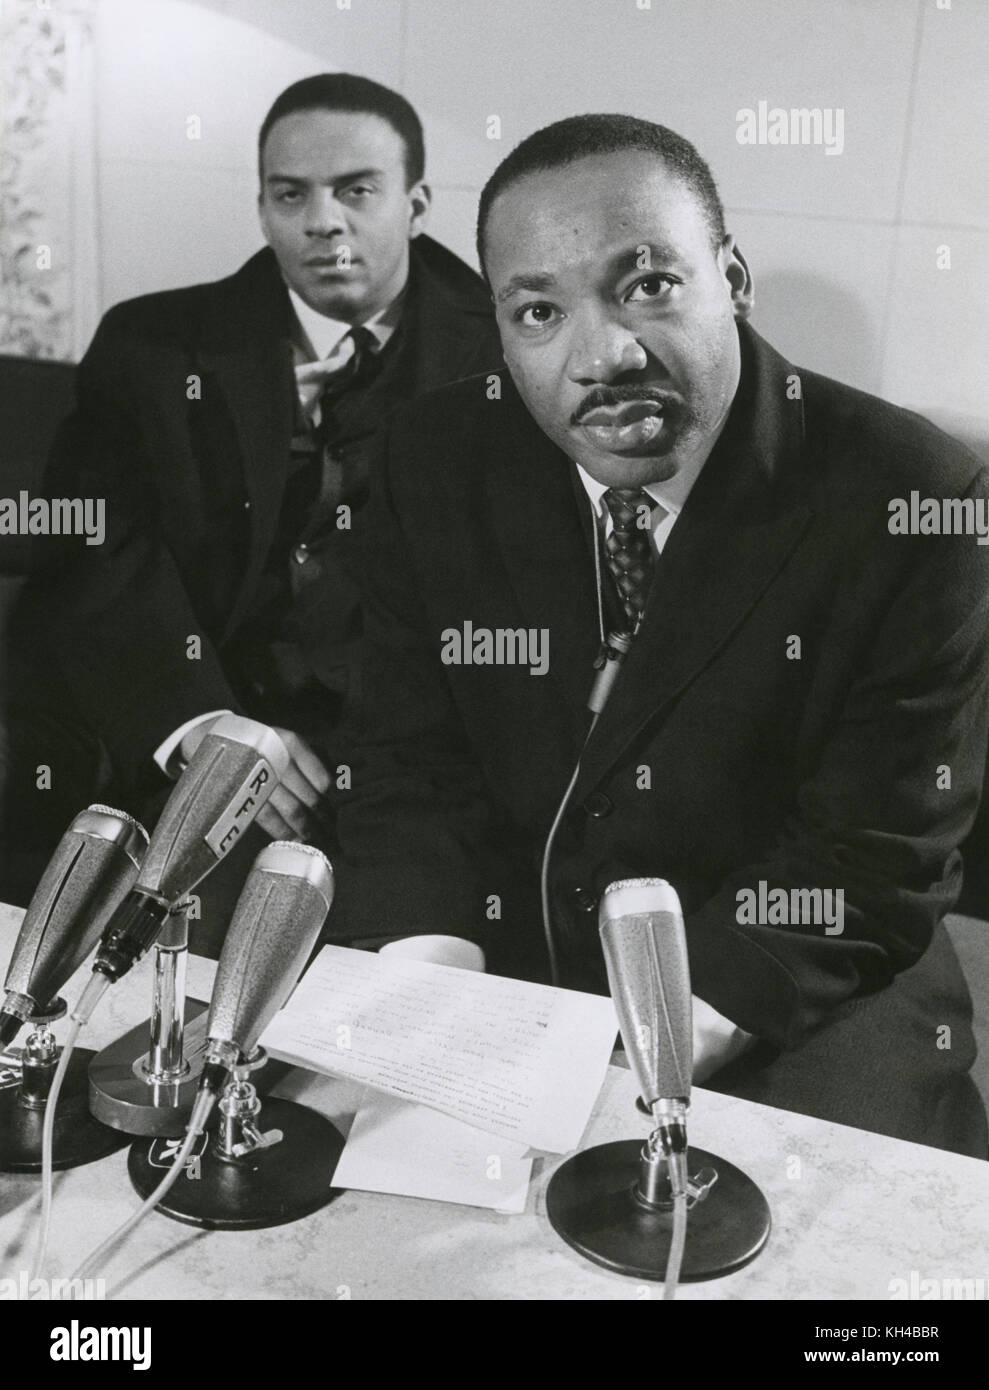 Dr. Martin Luther King, Jr. and Andrew Young during a press conference at Arlanda in Stockholm, Sweden on December 10th, 1964, the day Dr. King received the Nobel Peace Prize. Stock Photo